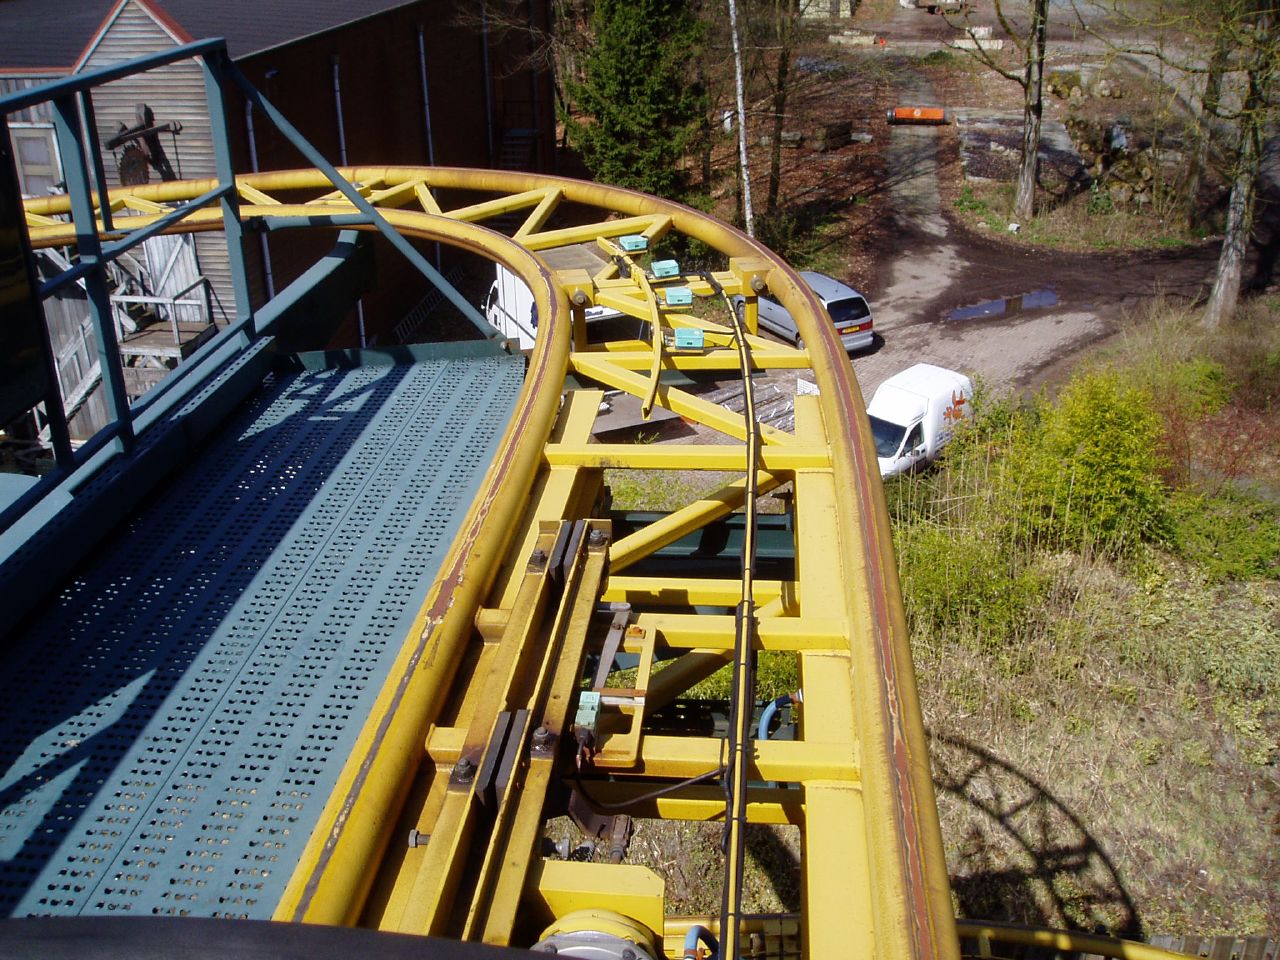 You are currently viewing Flying Dutchman Gold Mine (Walibi Holland)